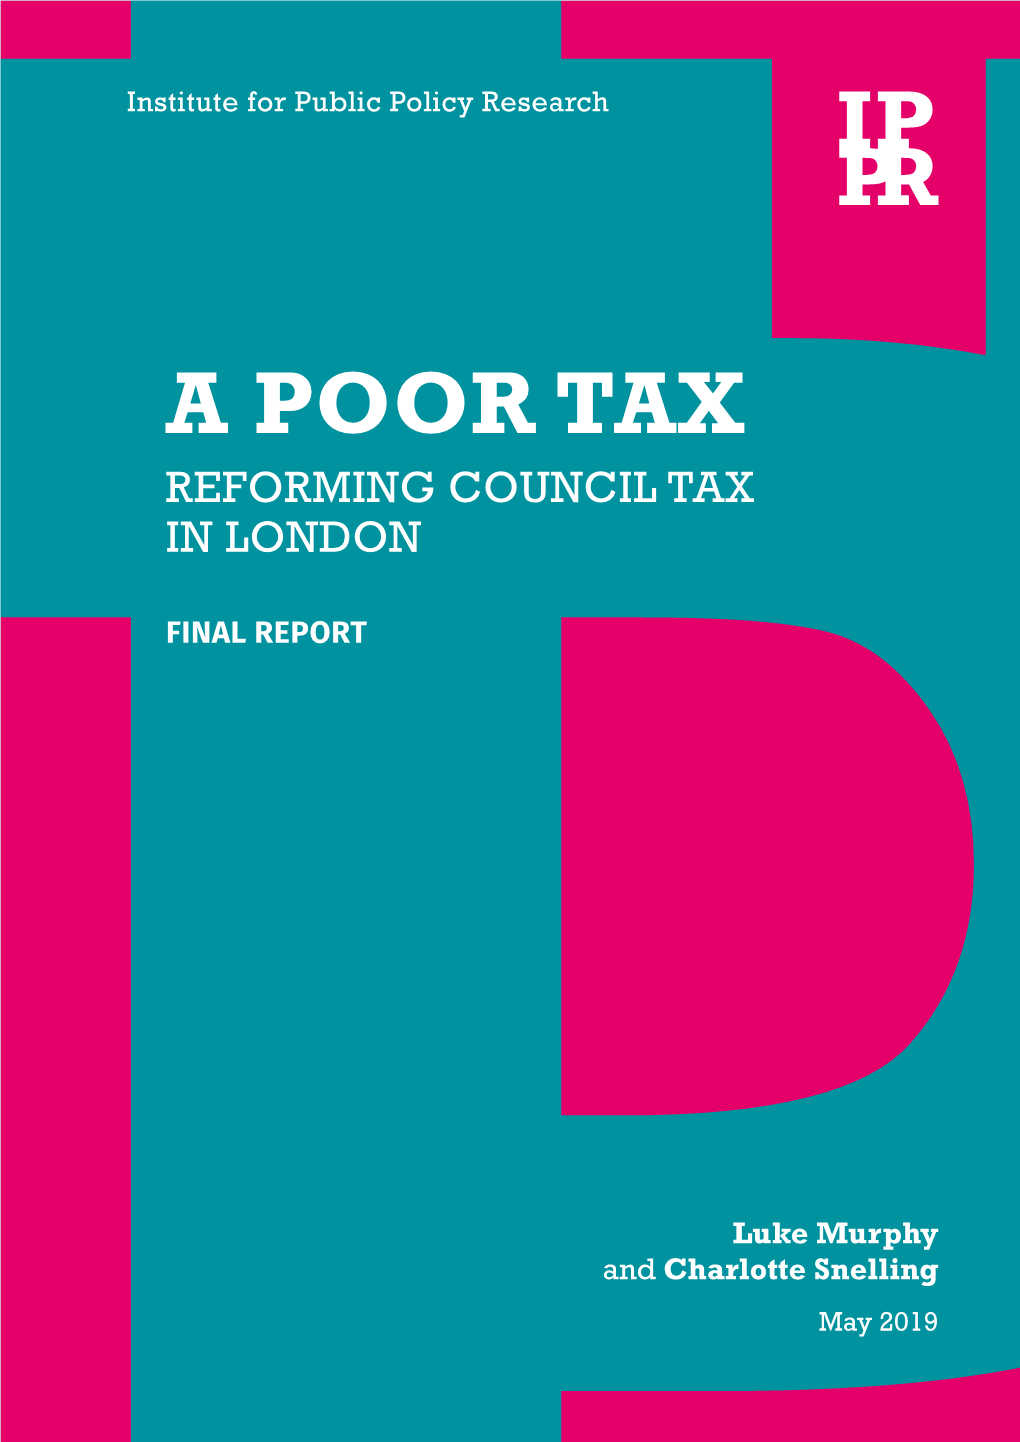 A Poor Tax Reforming Council Tax in London